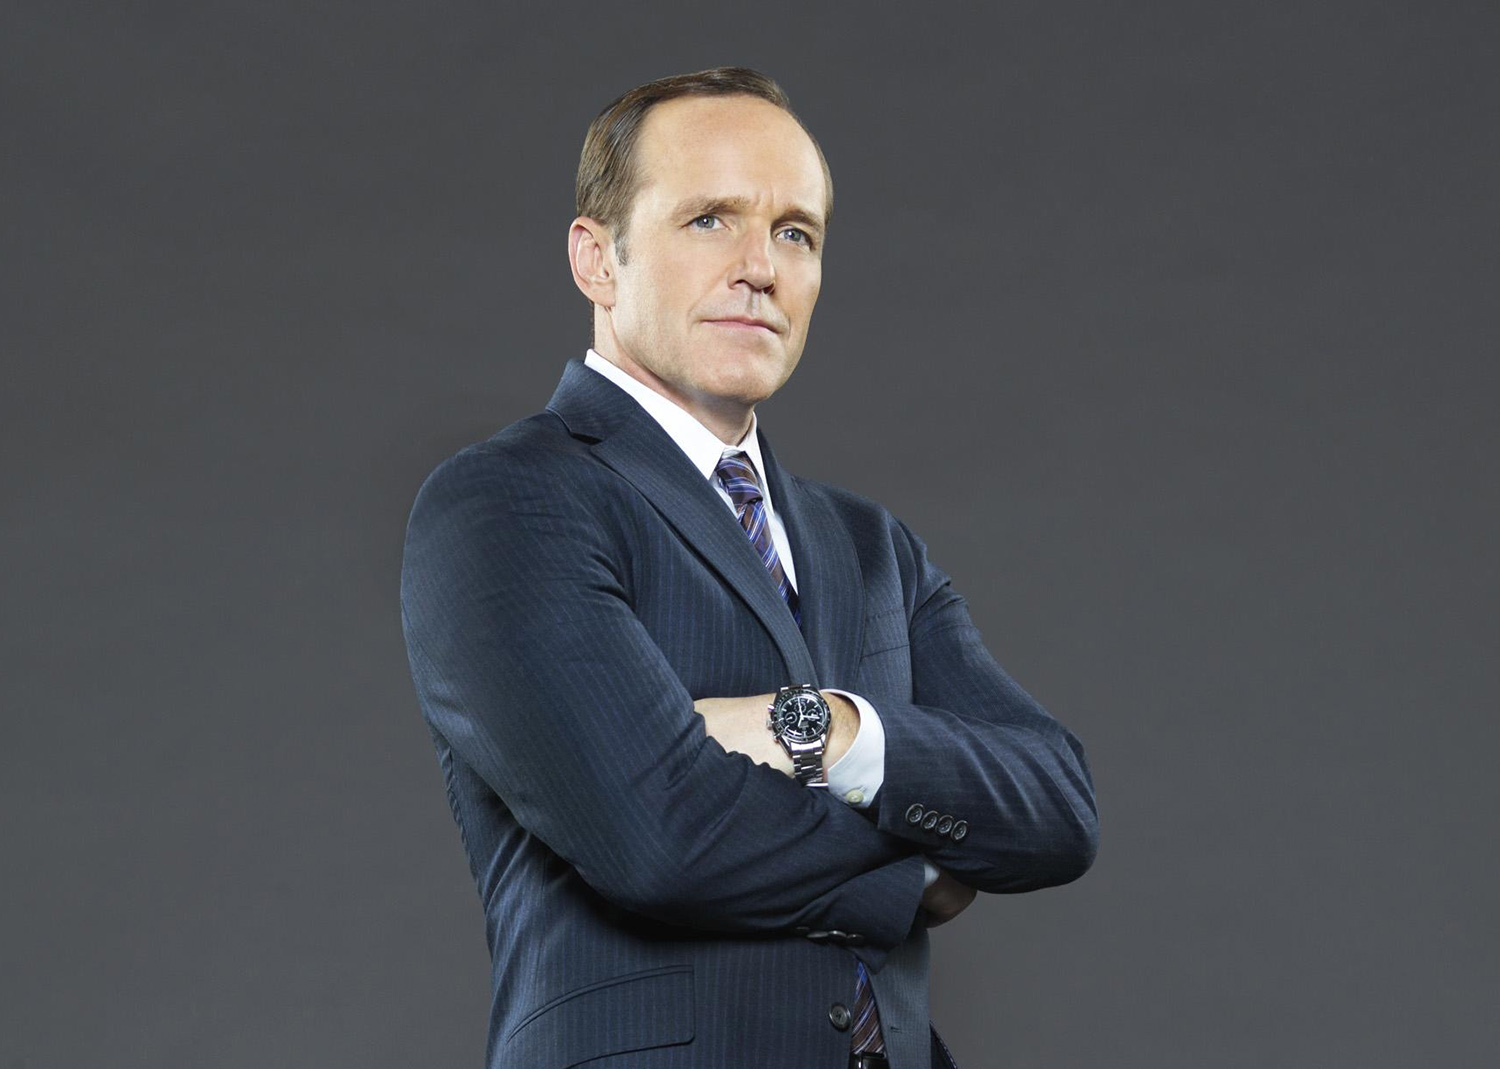 Phil-Coulson-Watch